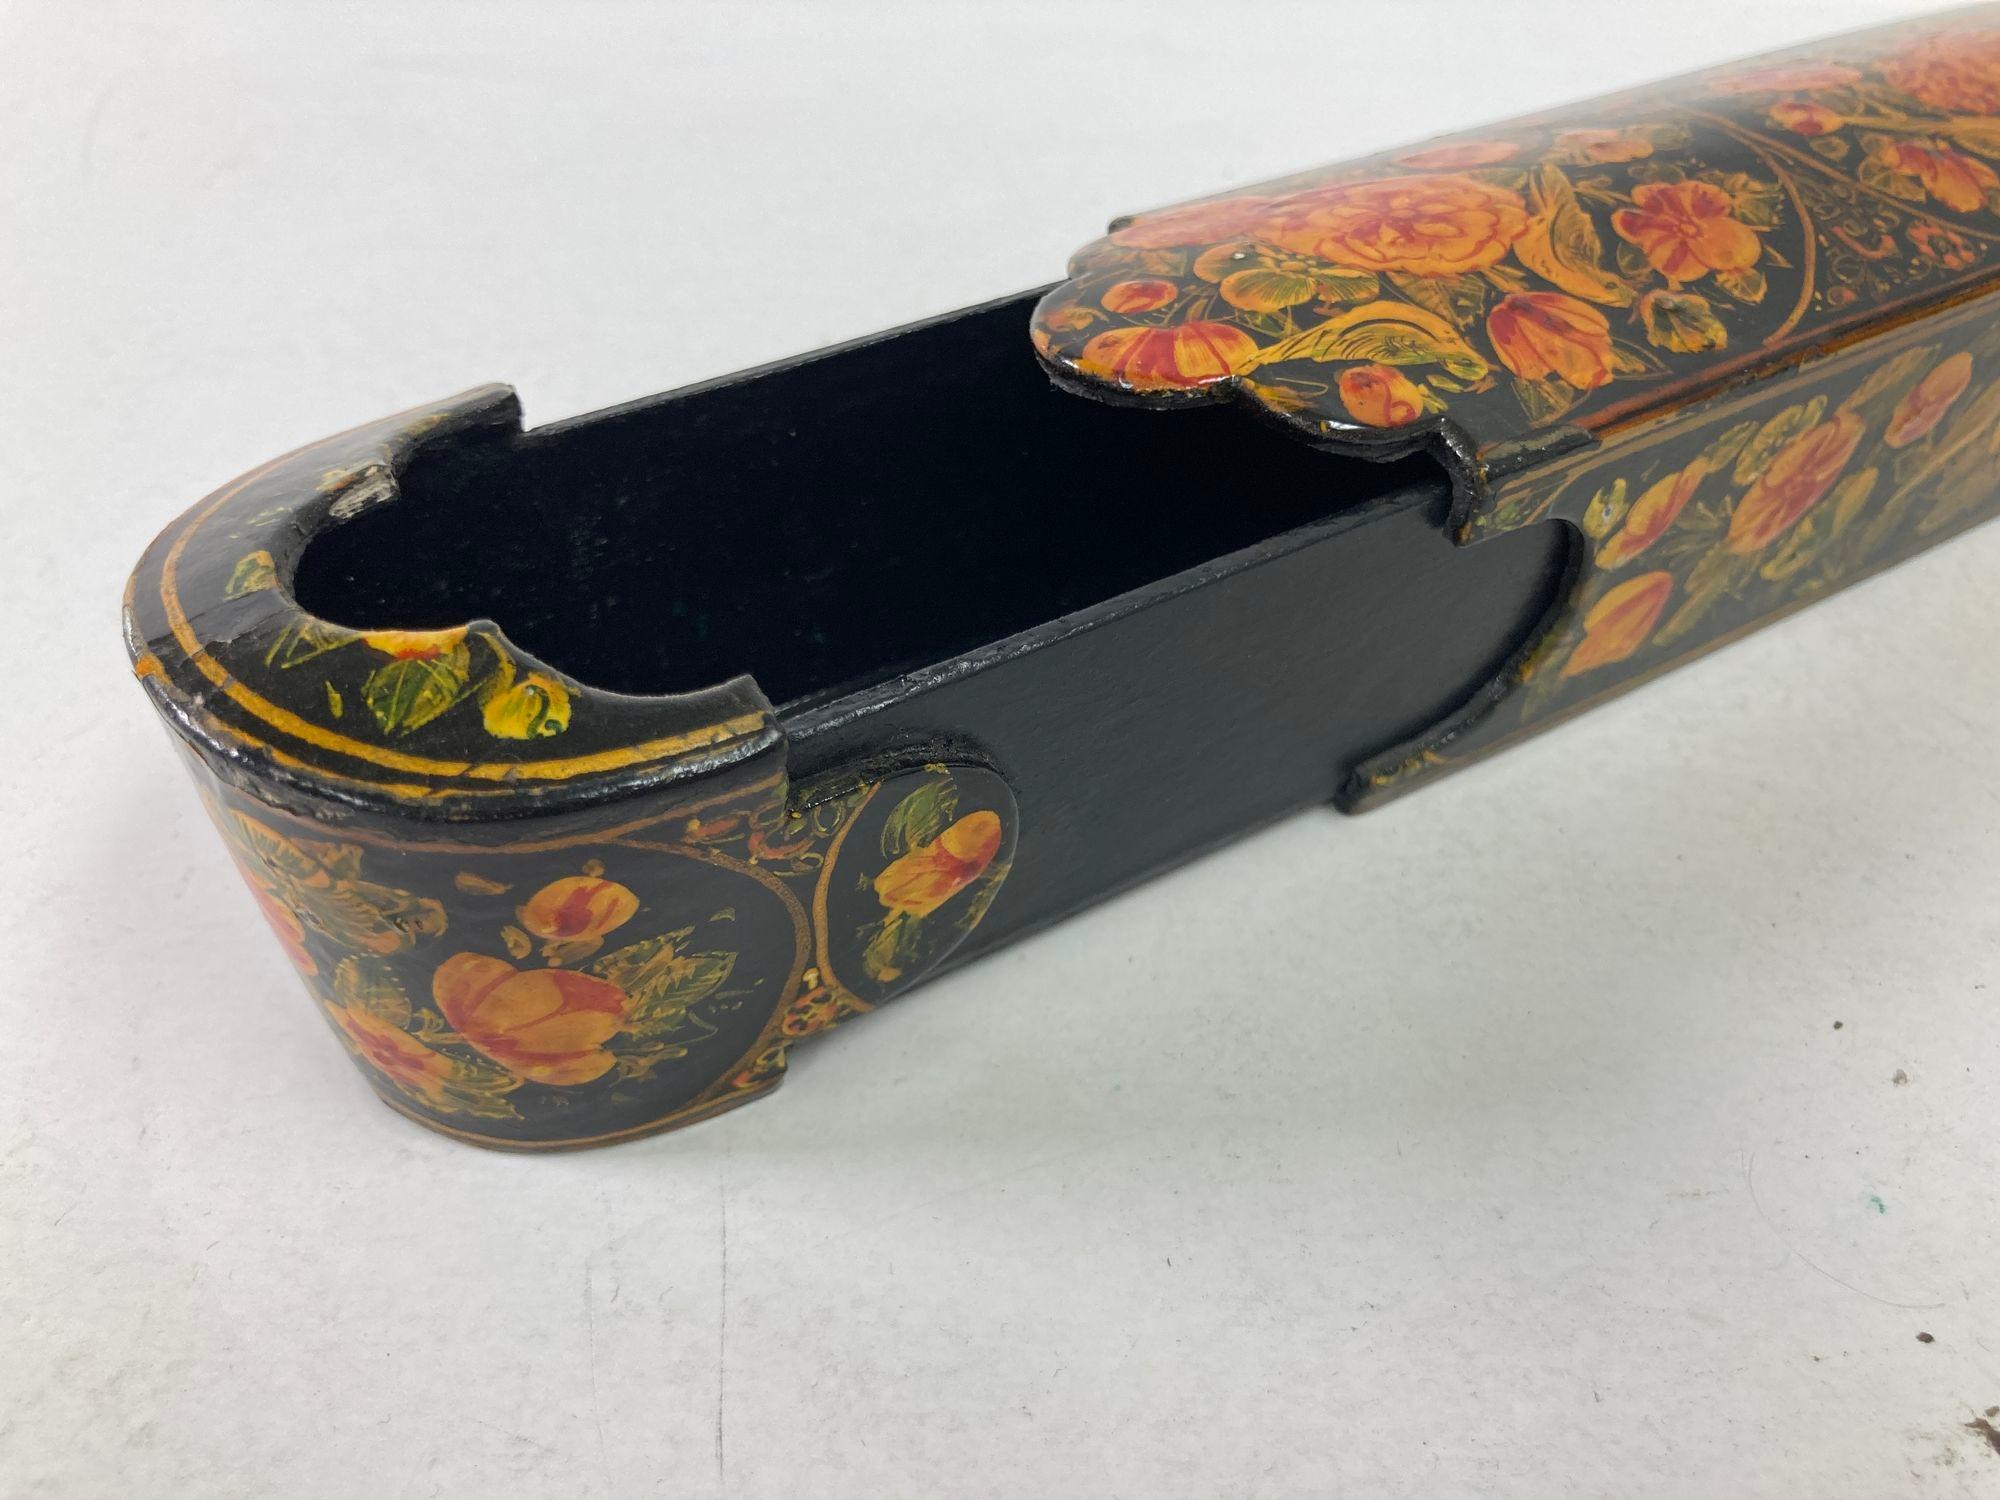 20th Century Persian Qajar Lacquer Pen Box Hand Painted with Floral and Birds Design